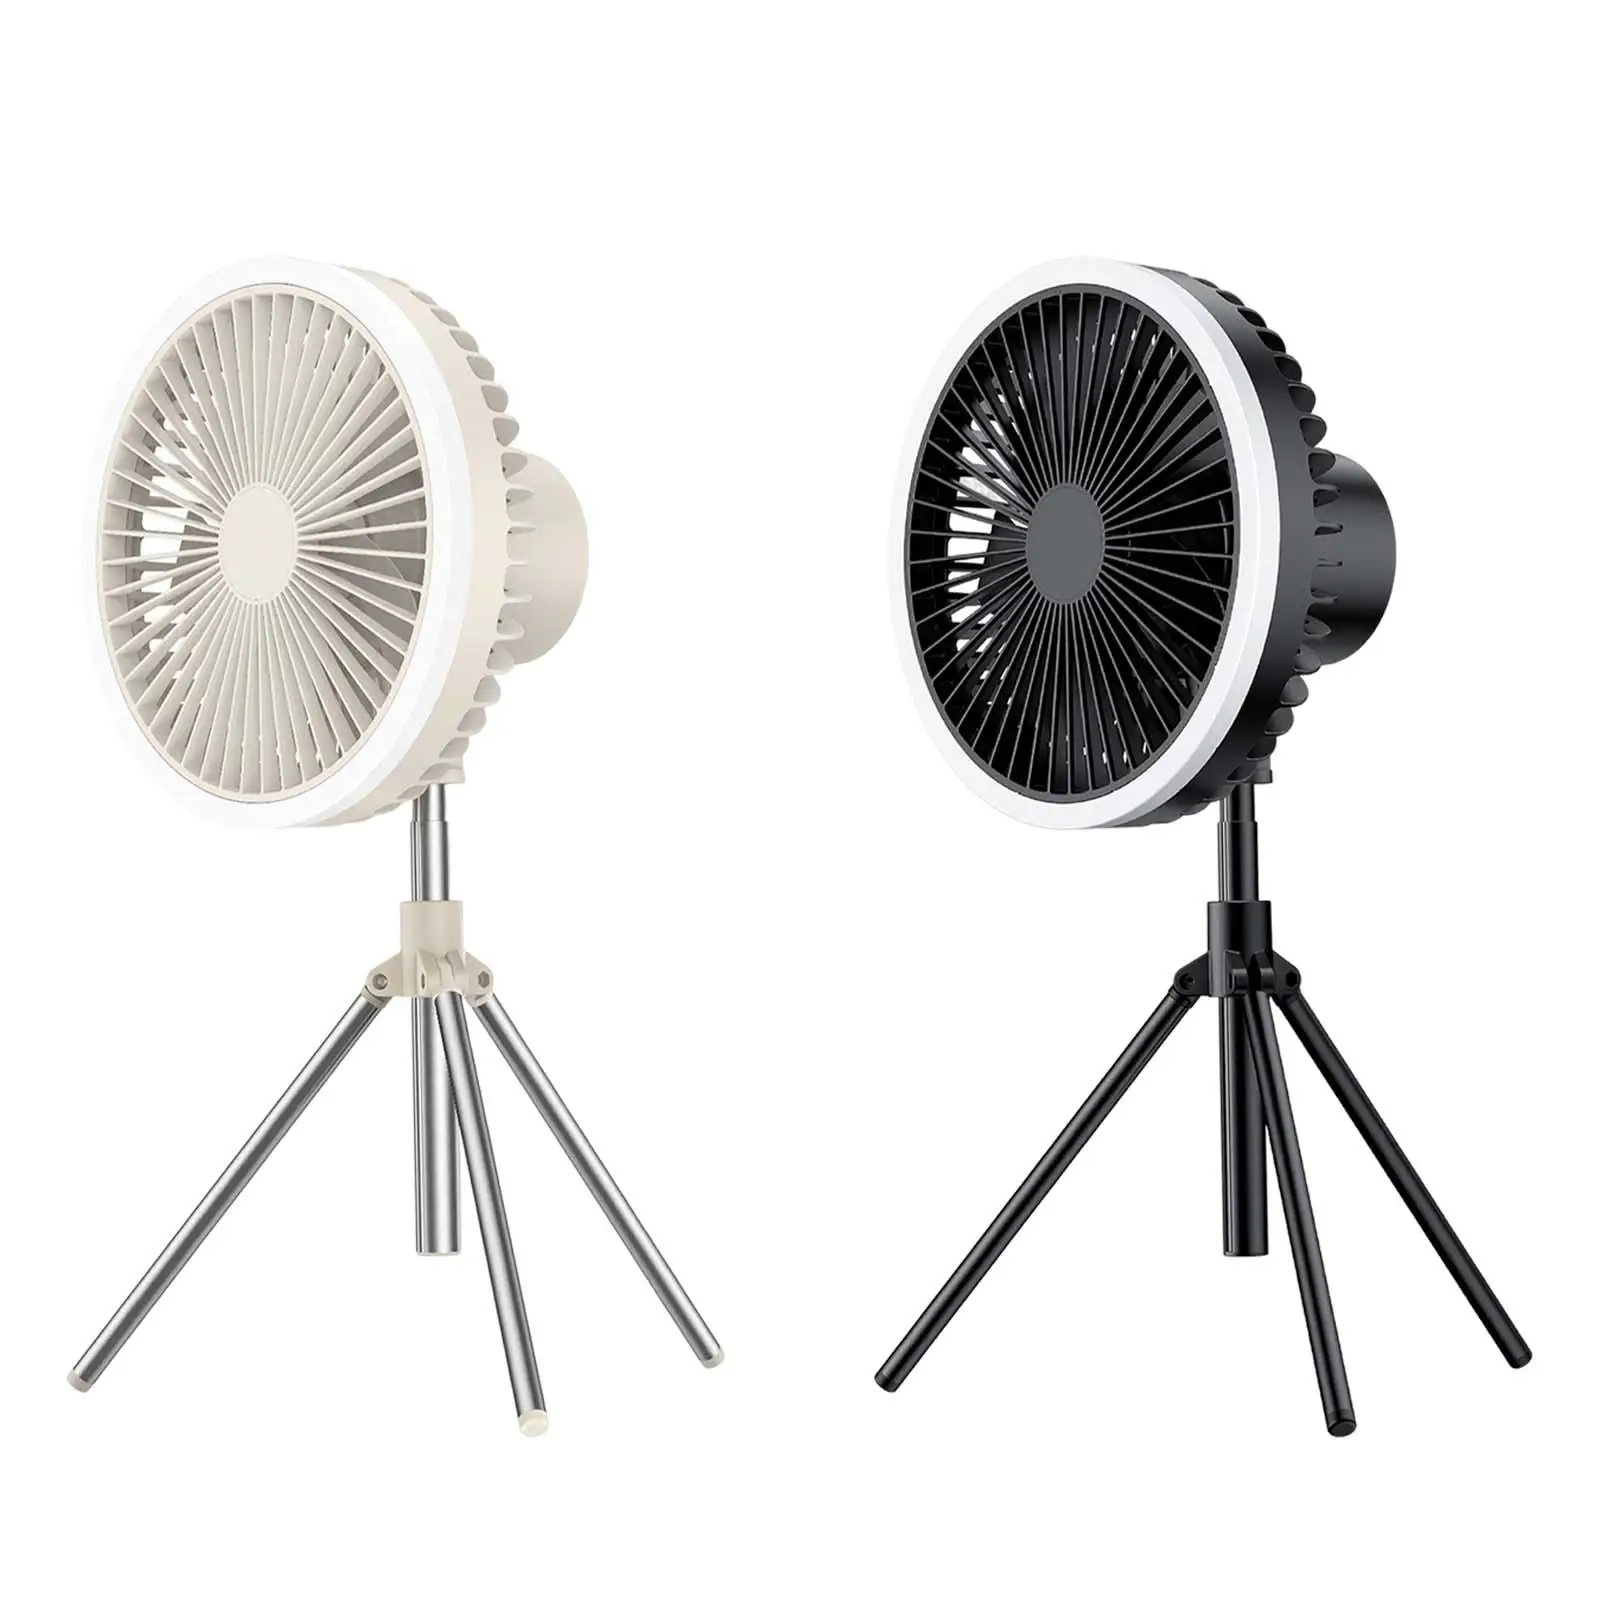 Camping Fan 4 Speeds with Hanging Hook Tripod Fan for Camping Travel Picnic